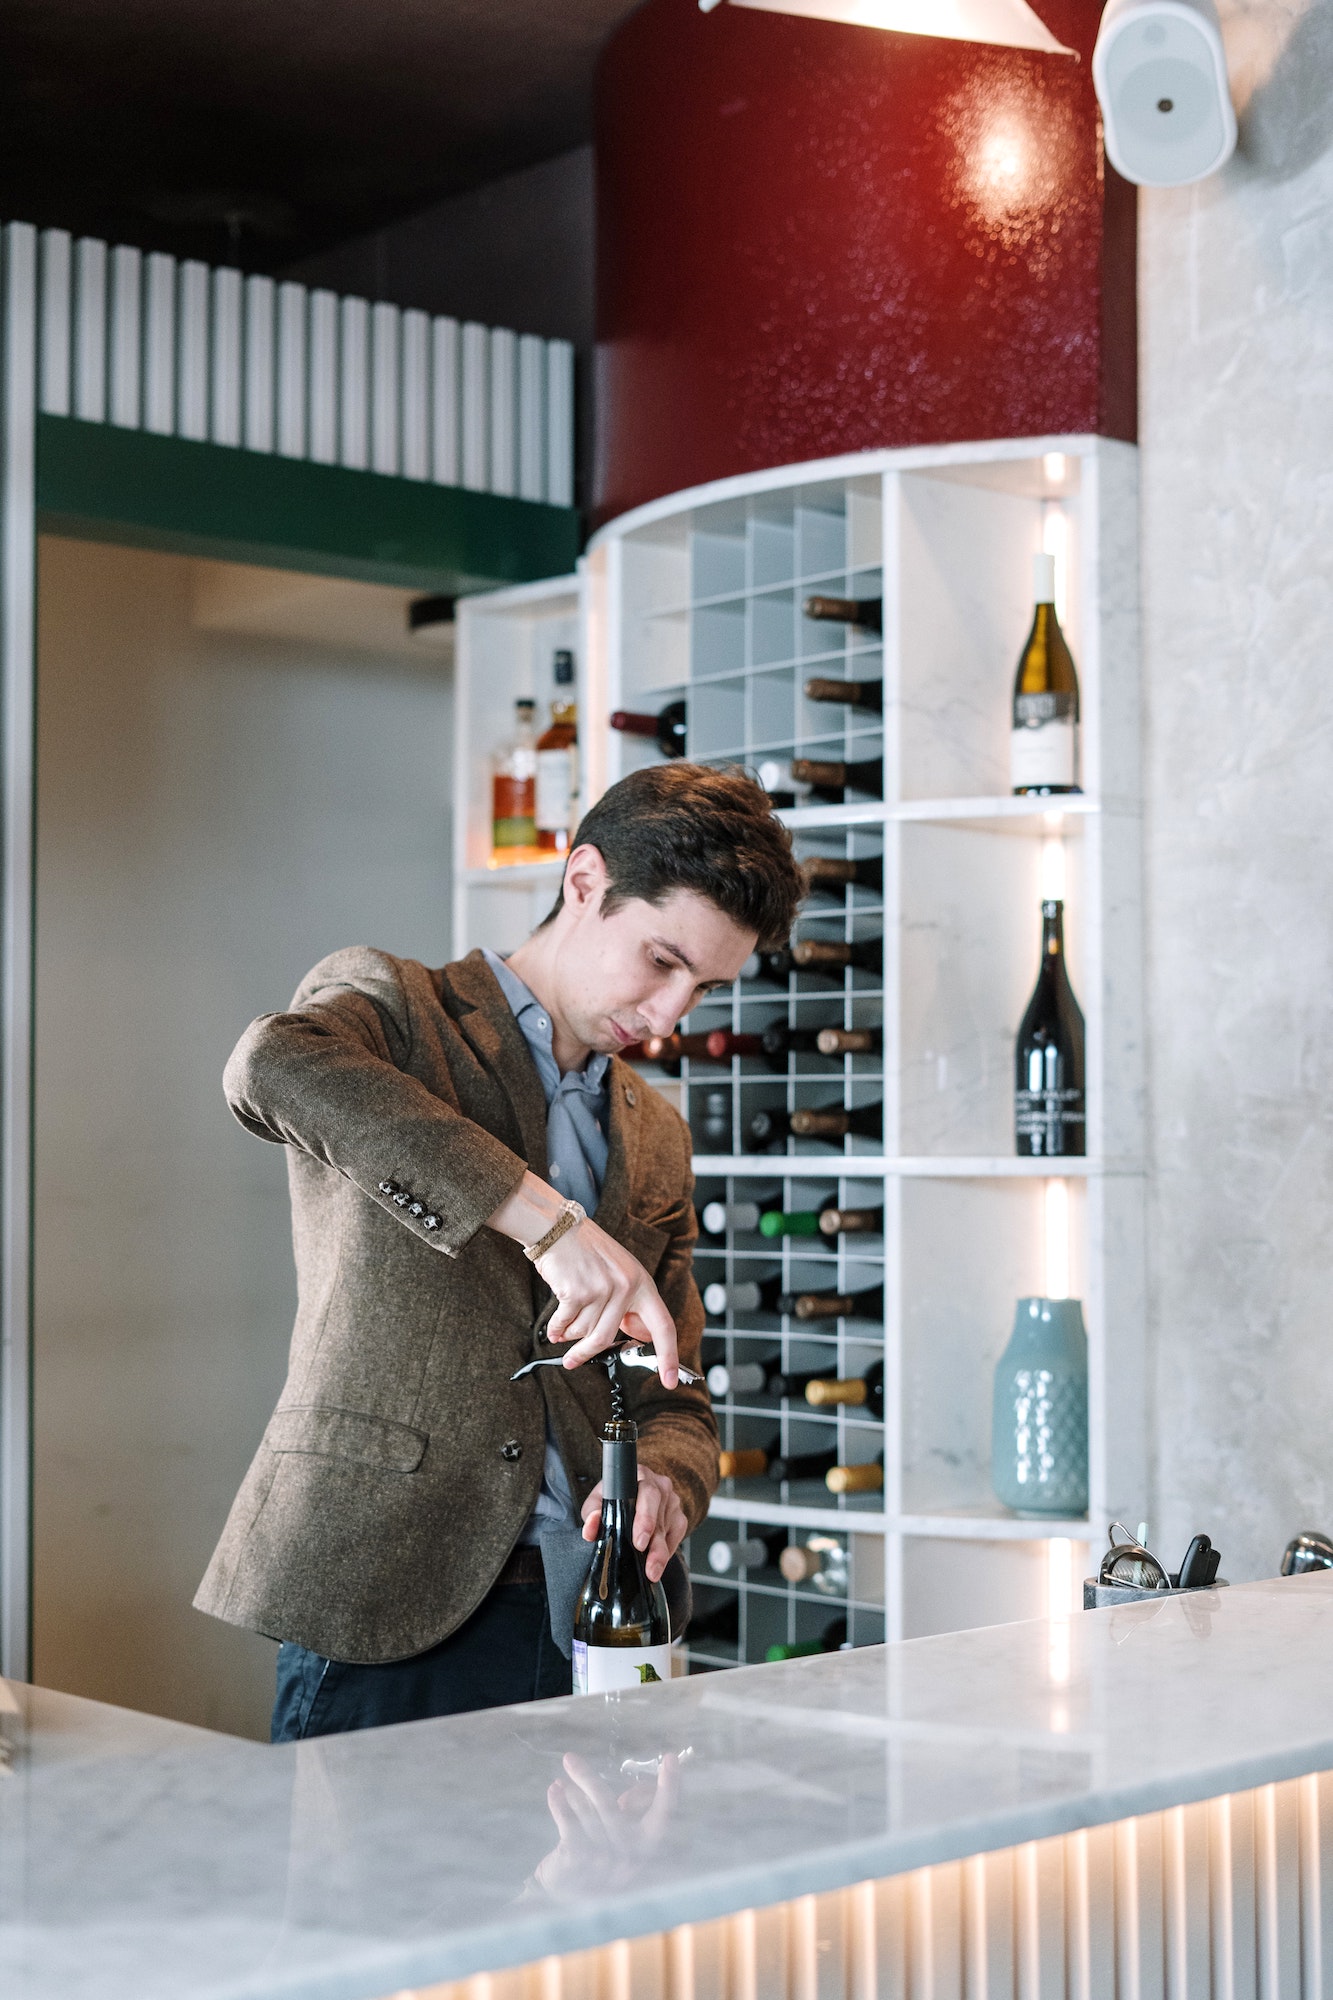 A great wine list is one that is not only organized but is also exciting and adventurous